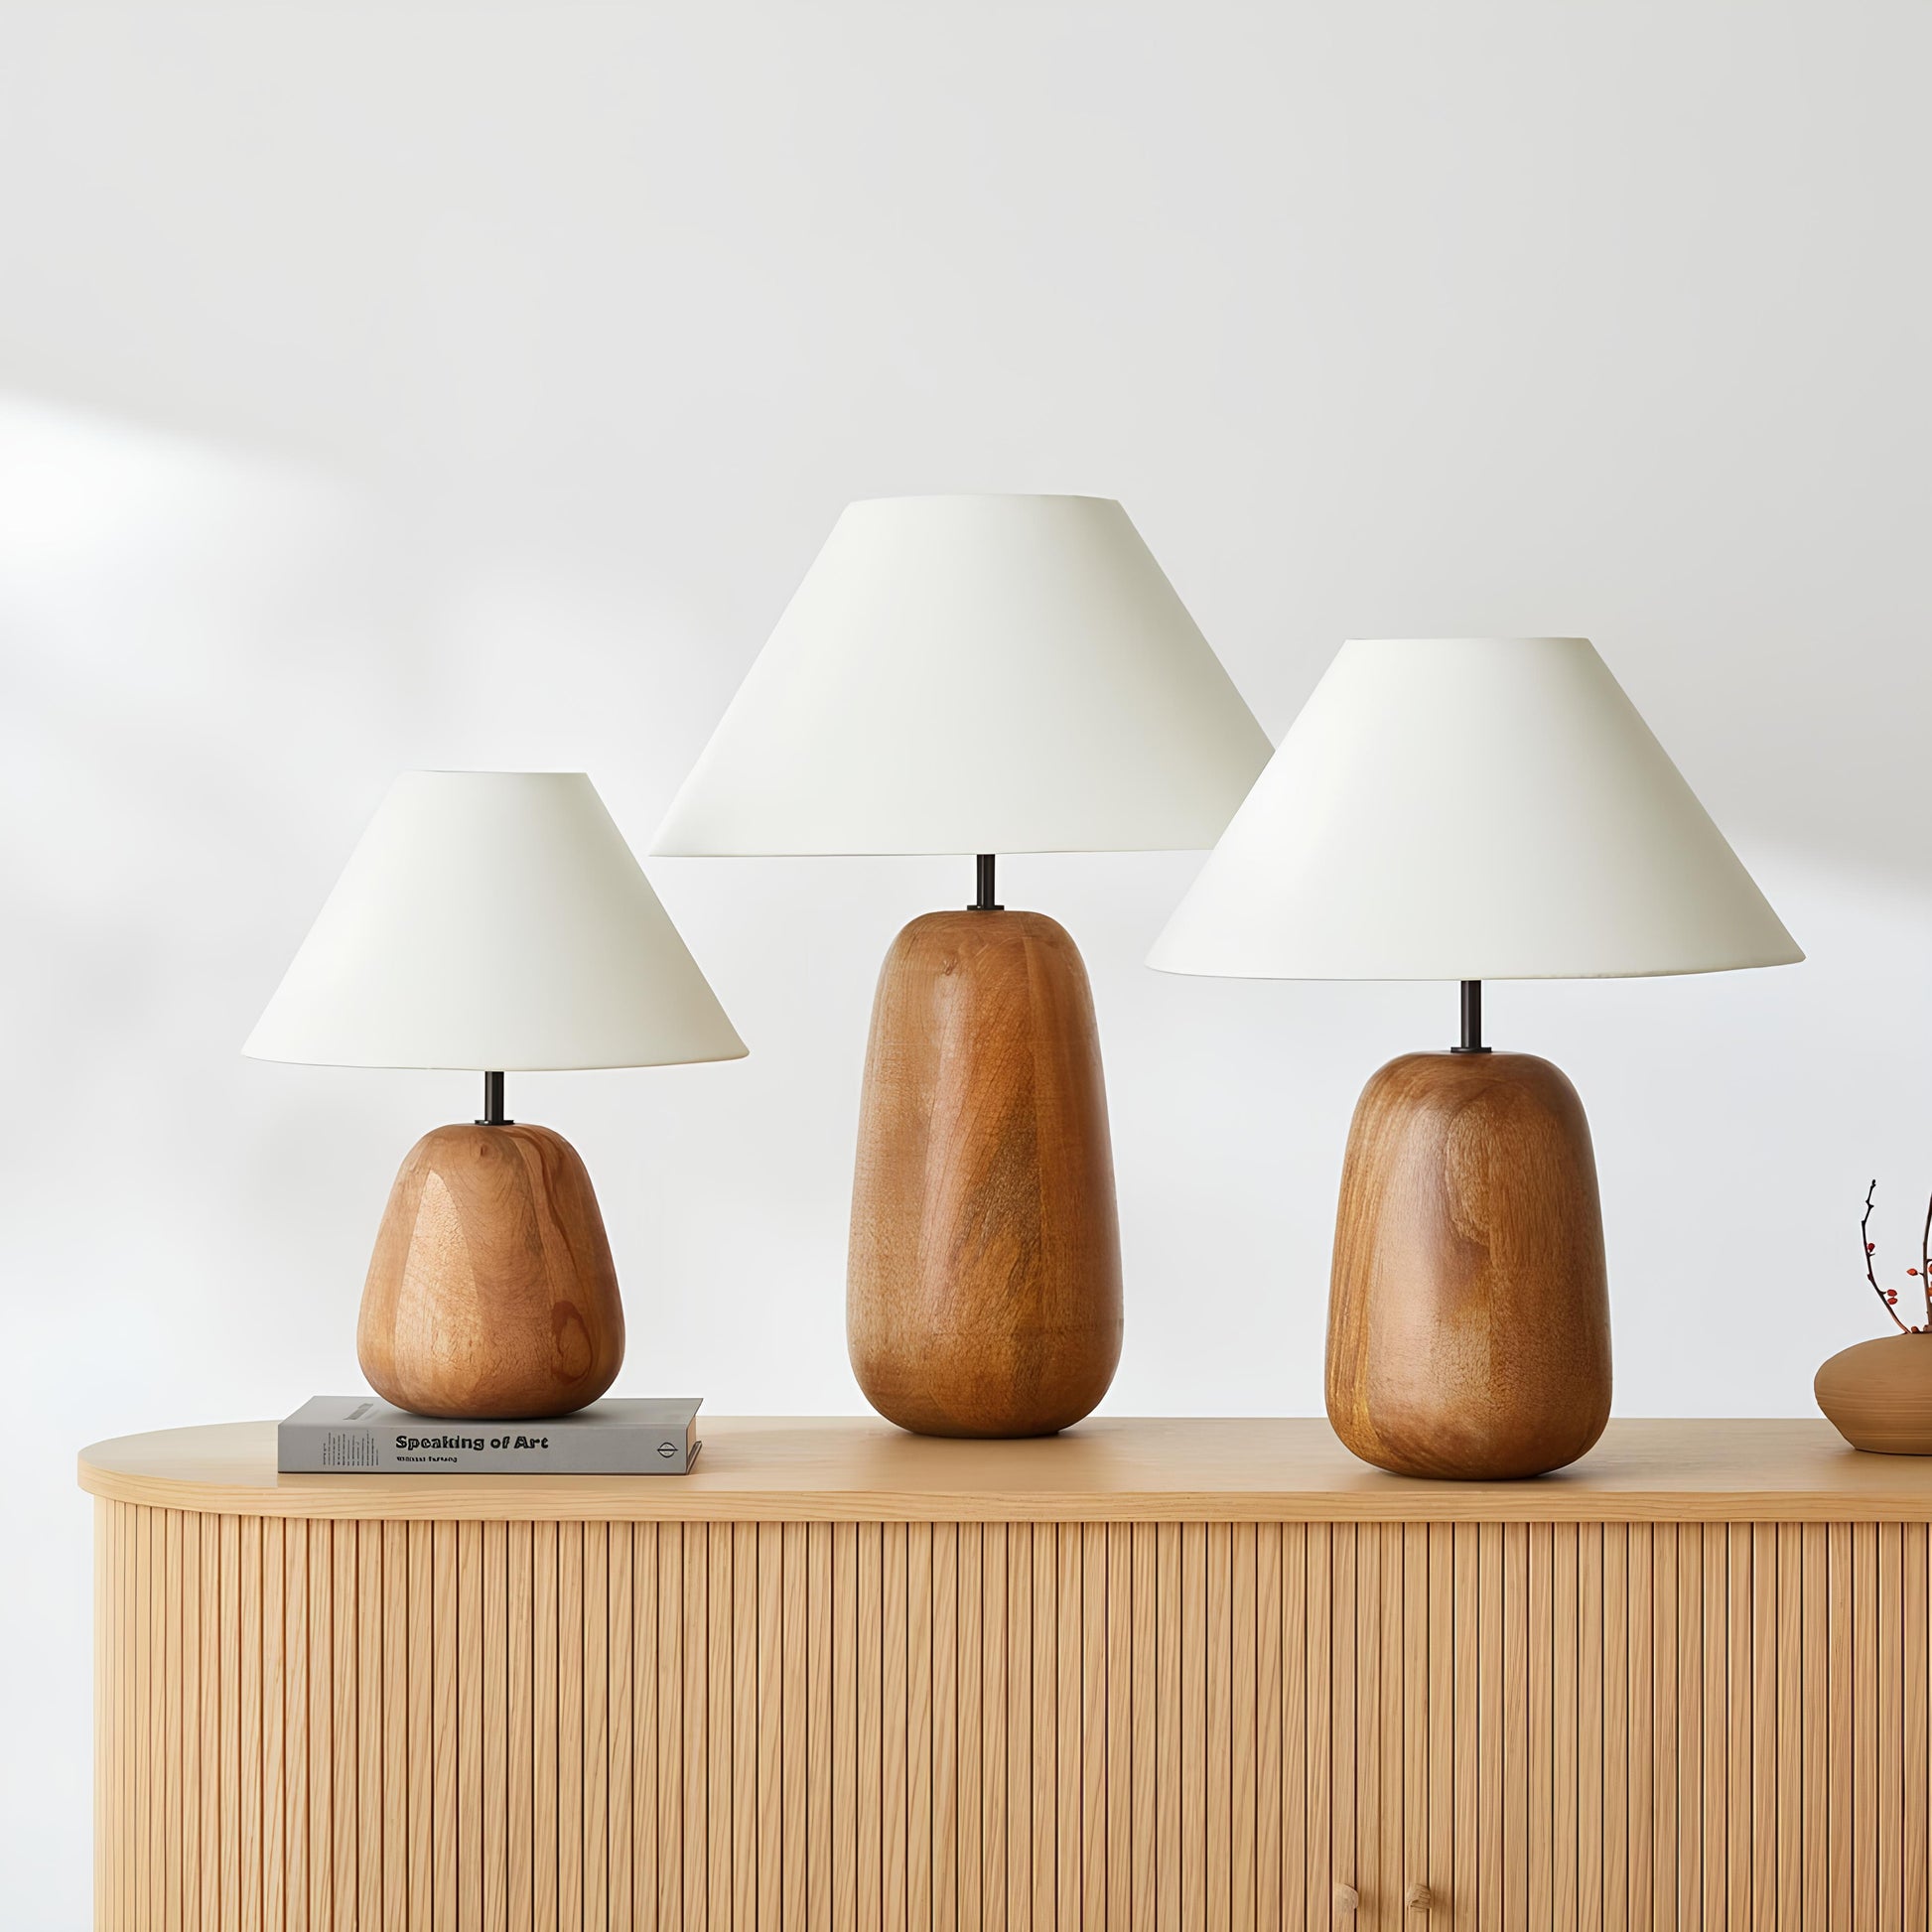 Rattan Table lamp for Living room | Bamboo Bedside table lamp | Cane Table lamp - Anaisha - Akway